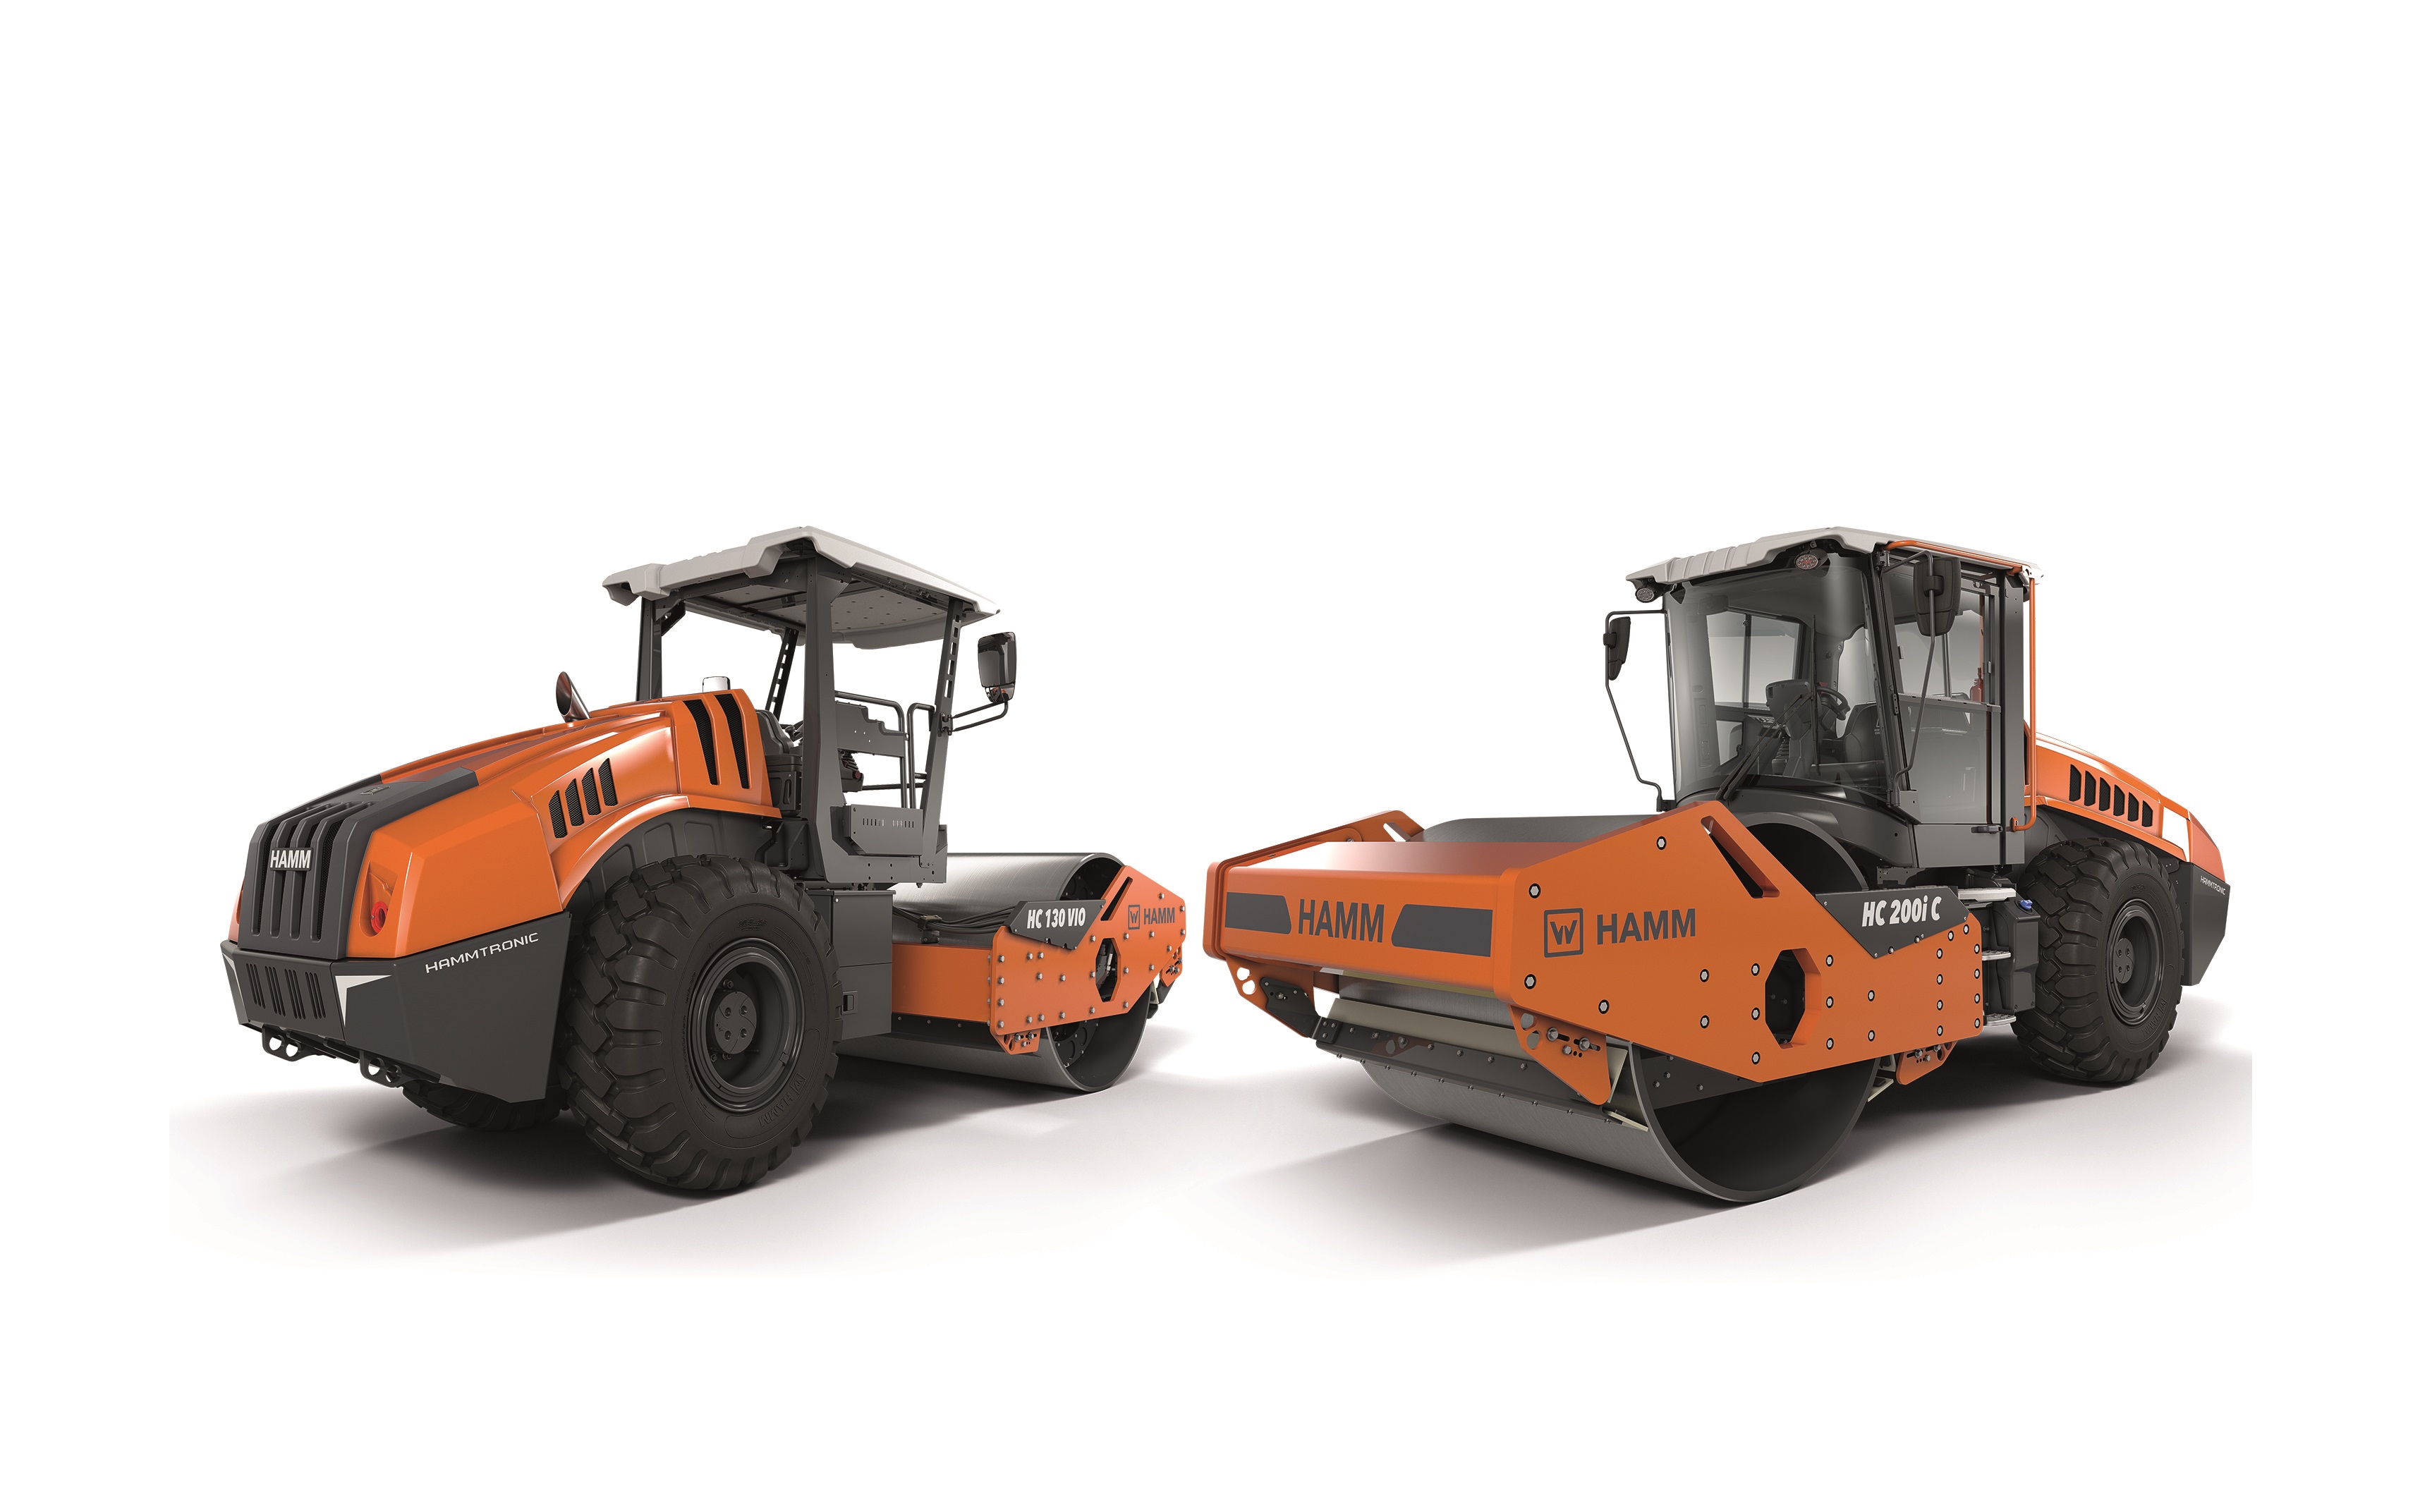 With the HC series, Hamm is launching a new generation of compactors on the market. With operating weights of 11–25 t and a wide range of equipment variants, they can comply with an extremely wide range of requirements.